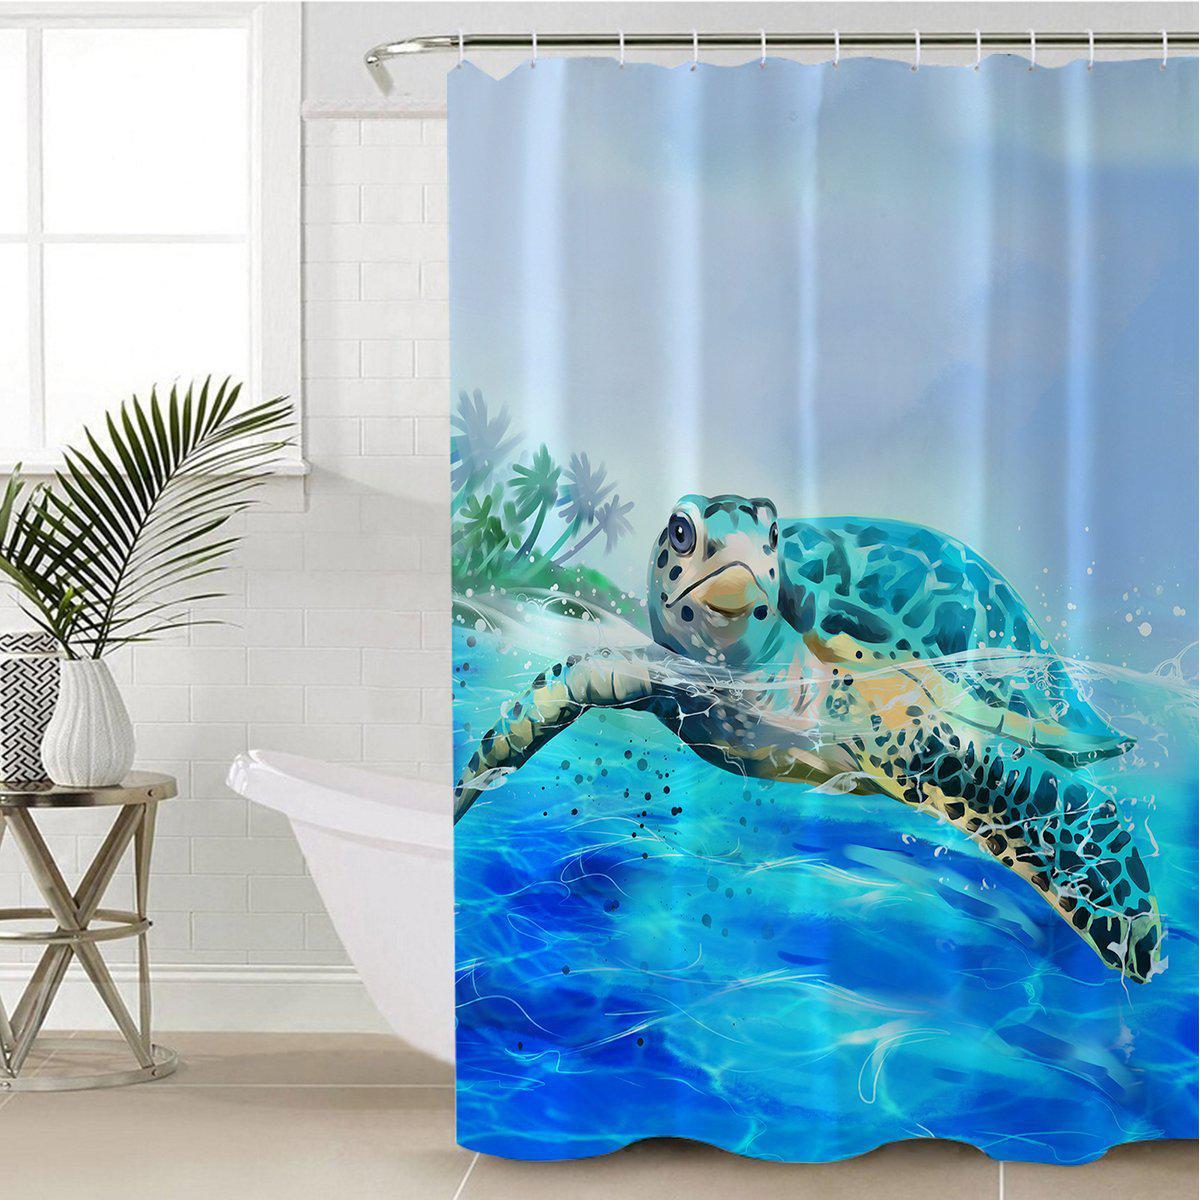 Shower Curtain - Sea Turtle Life by Coastal Passion